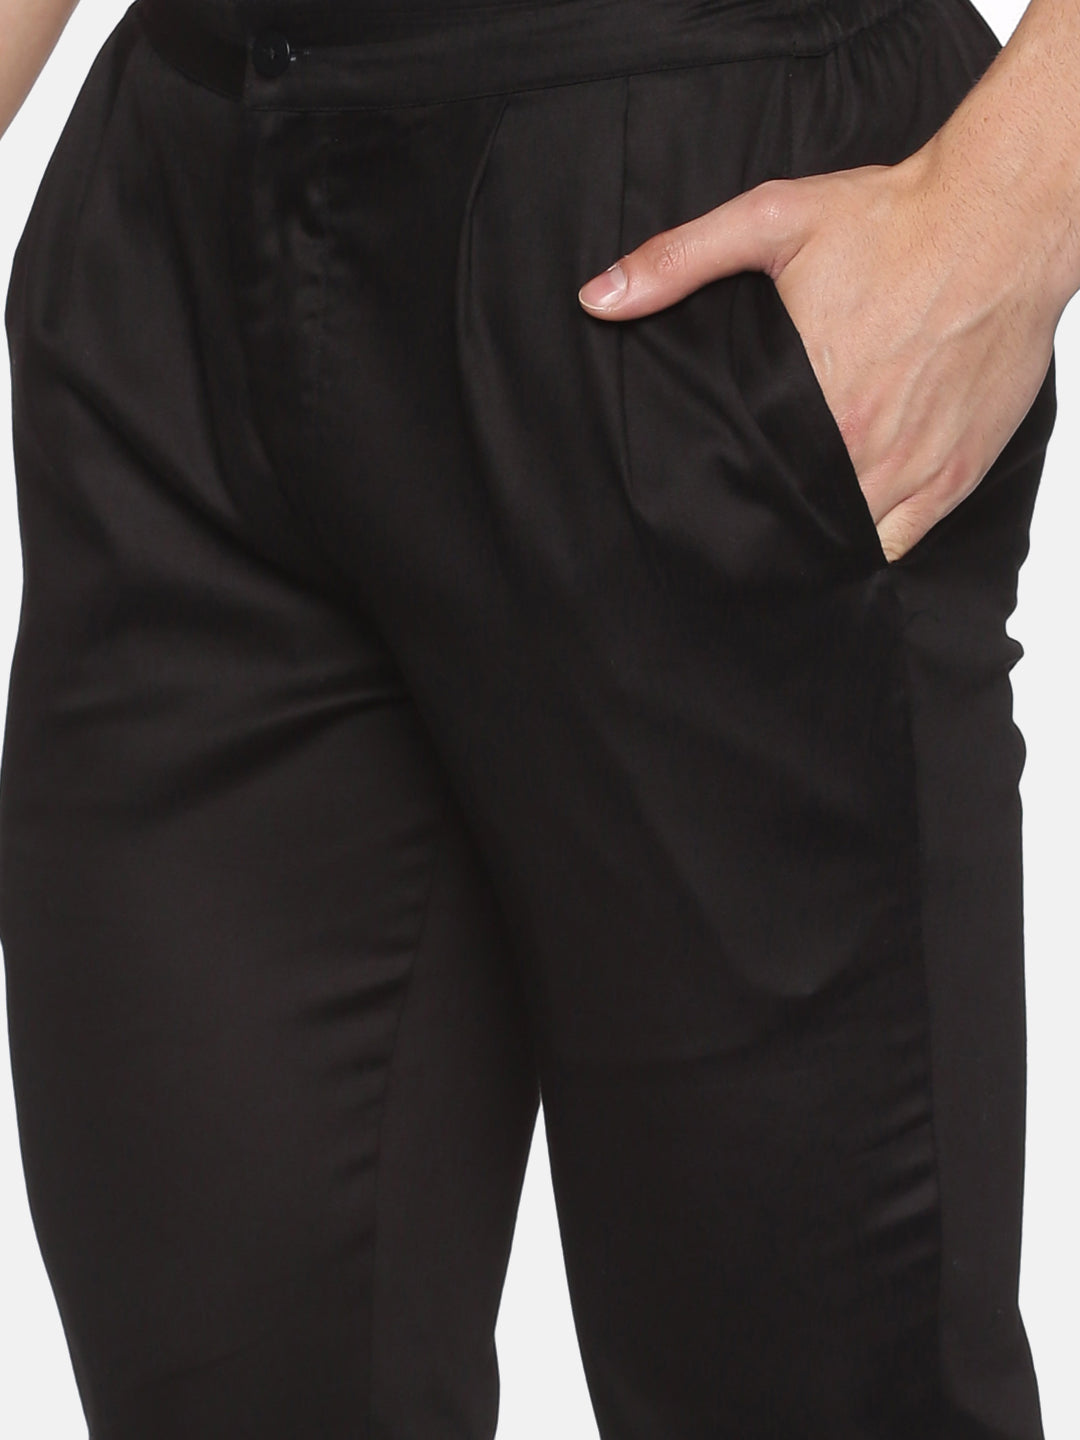 Black Cotton Satin Regular Fit Trouser with Pleated Front